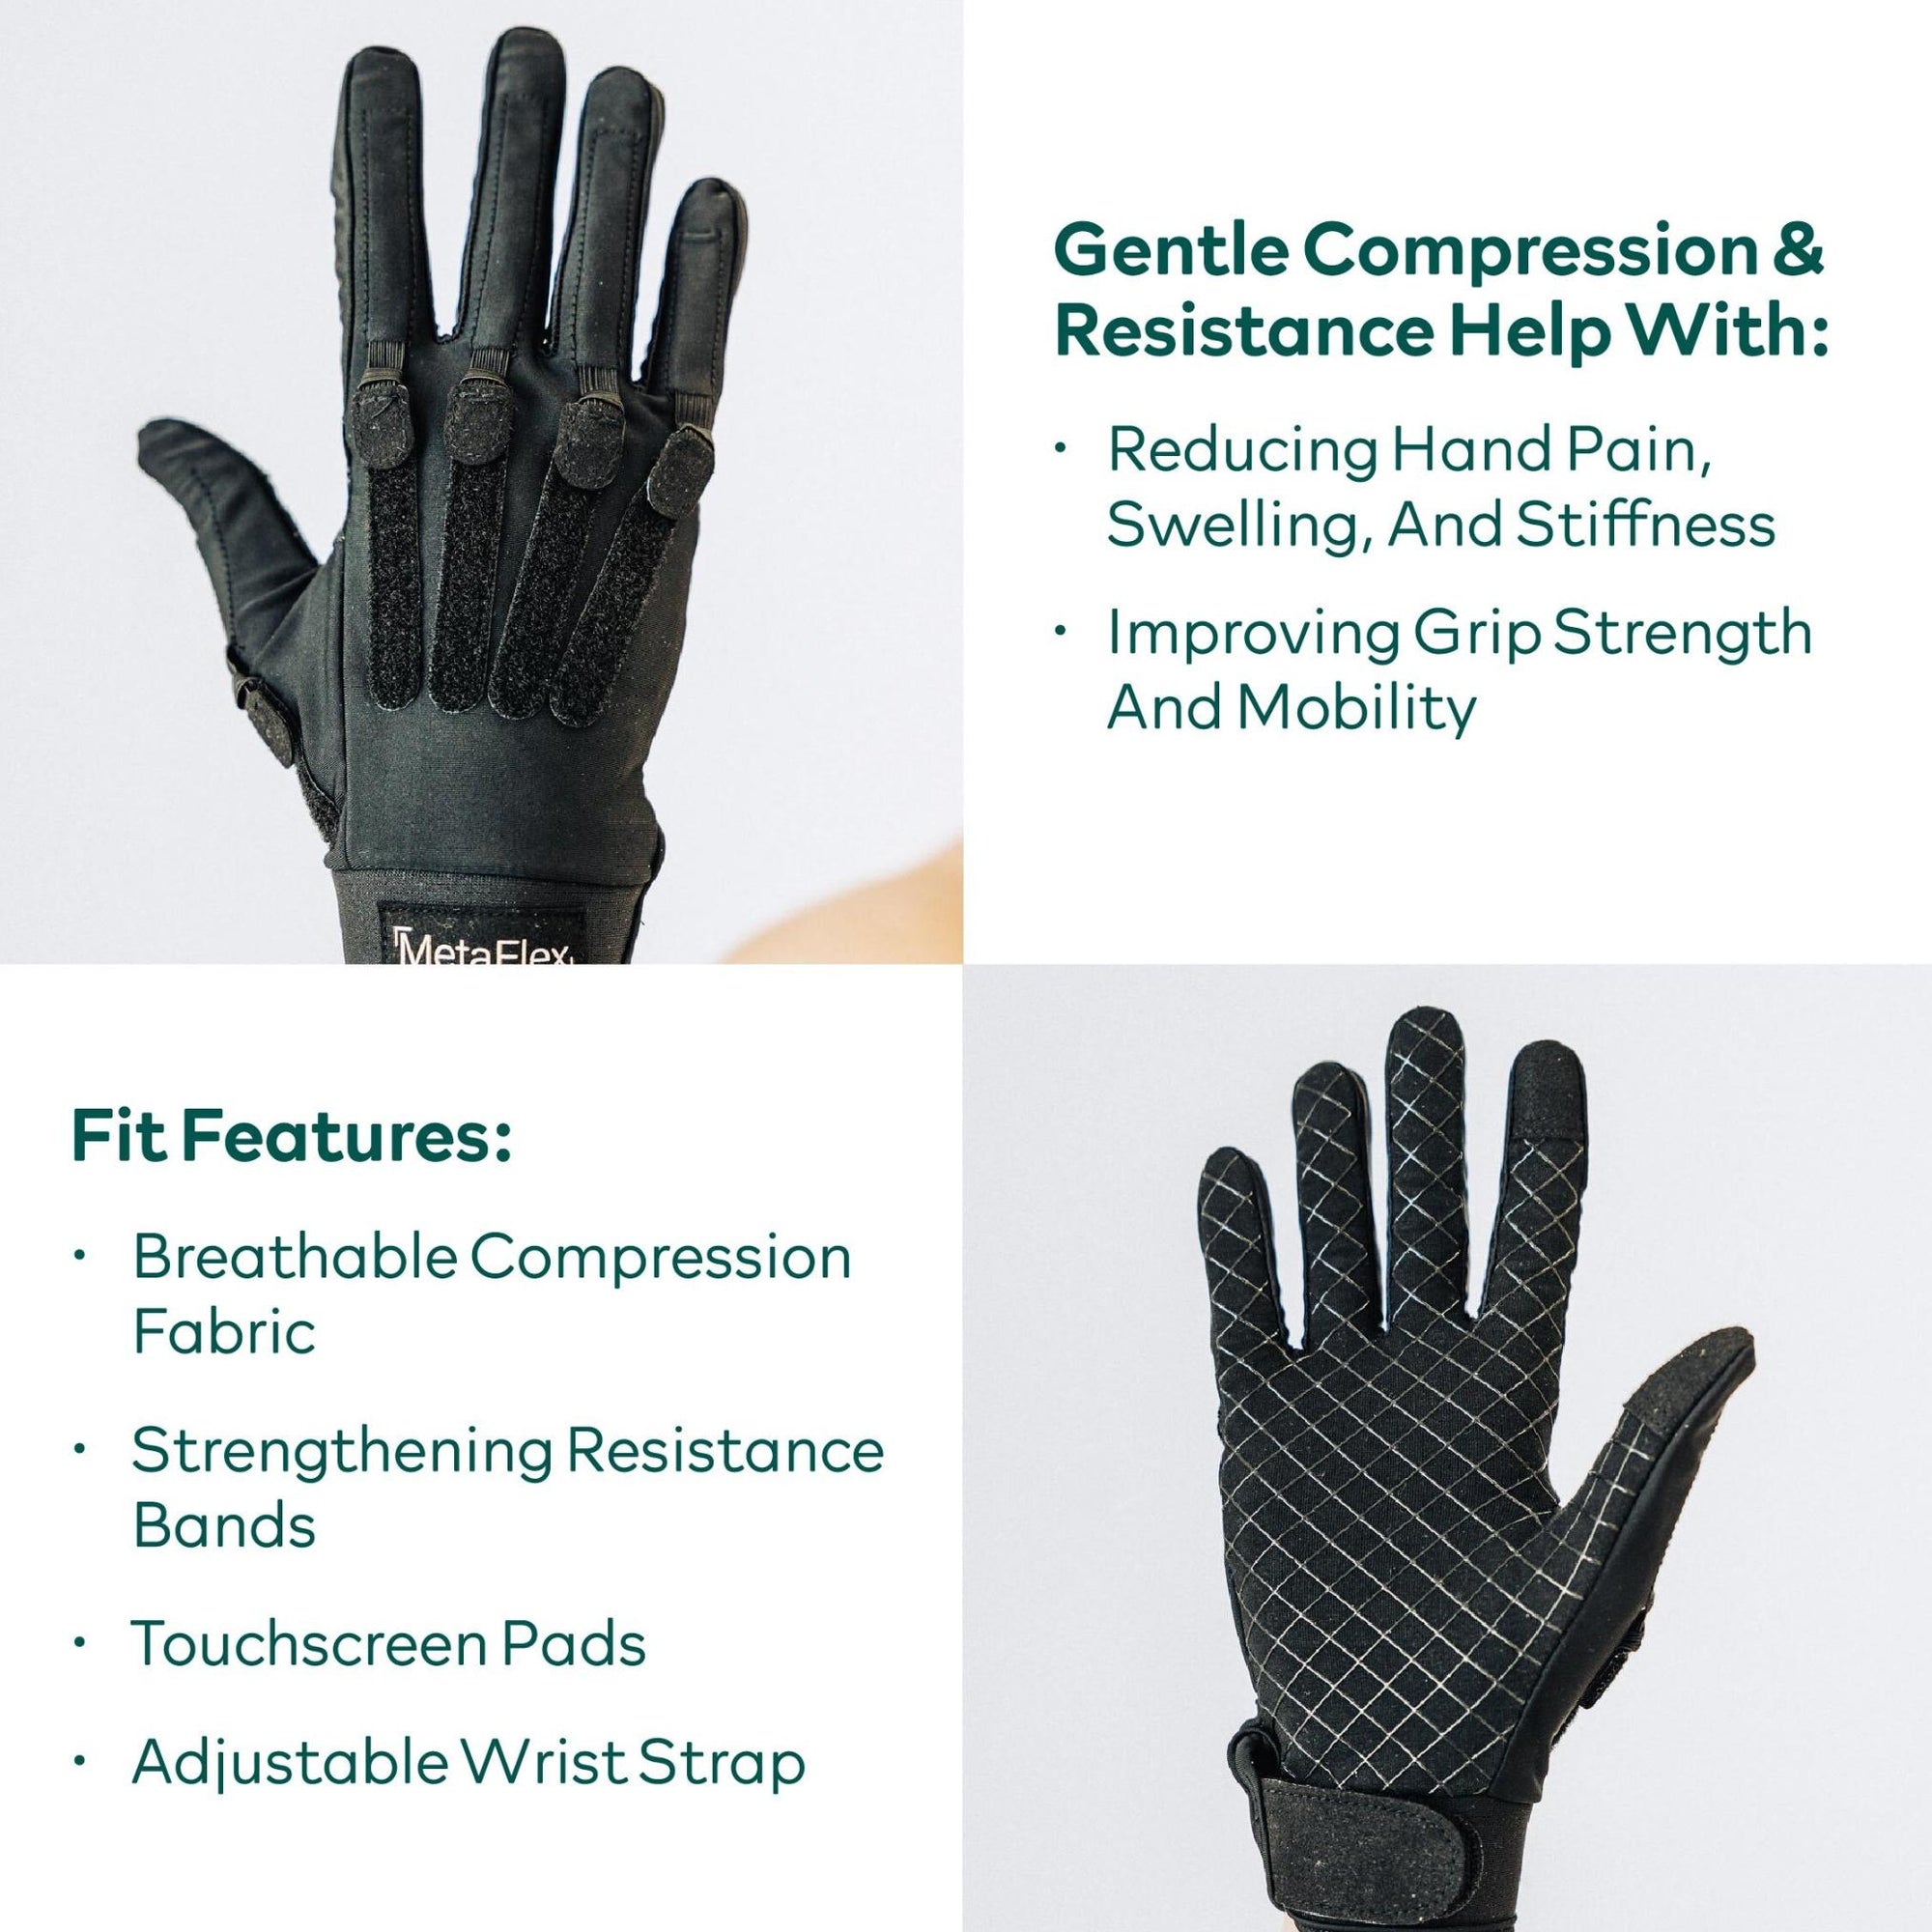 MetaFlex adjustable grip strengthener compression gloves provide gentle compression to reduce pain, swelling ,and stiffness while providing a comfortable compression and breathable fit